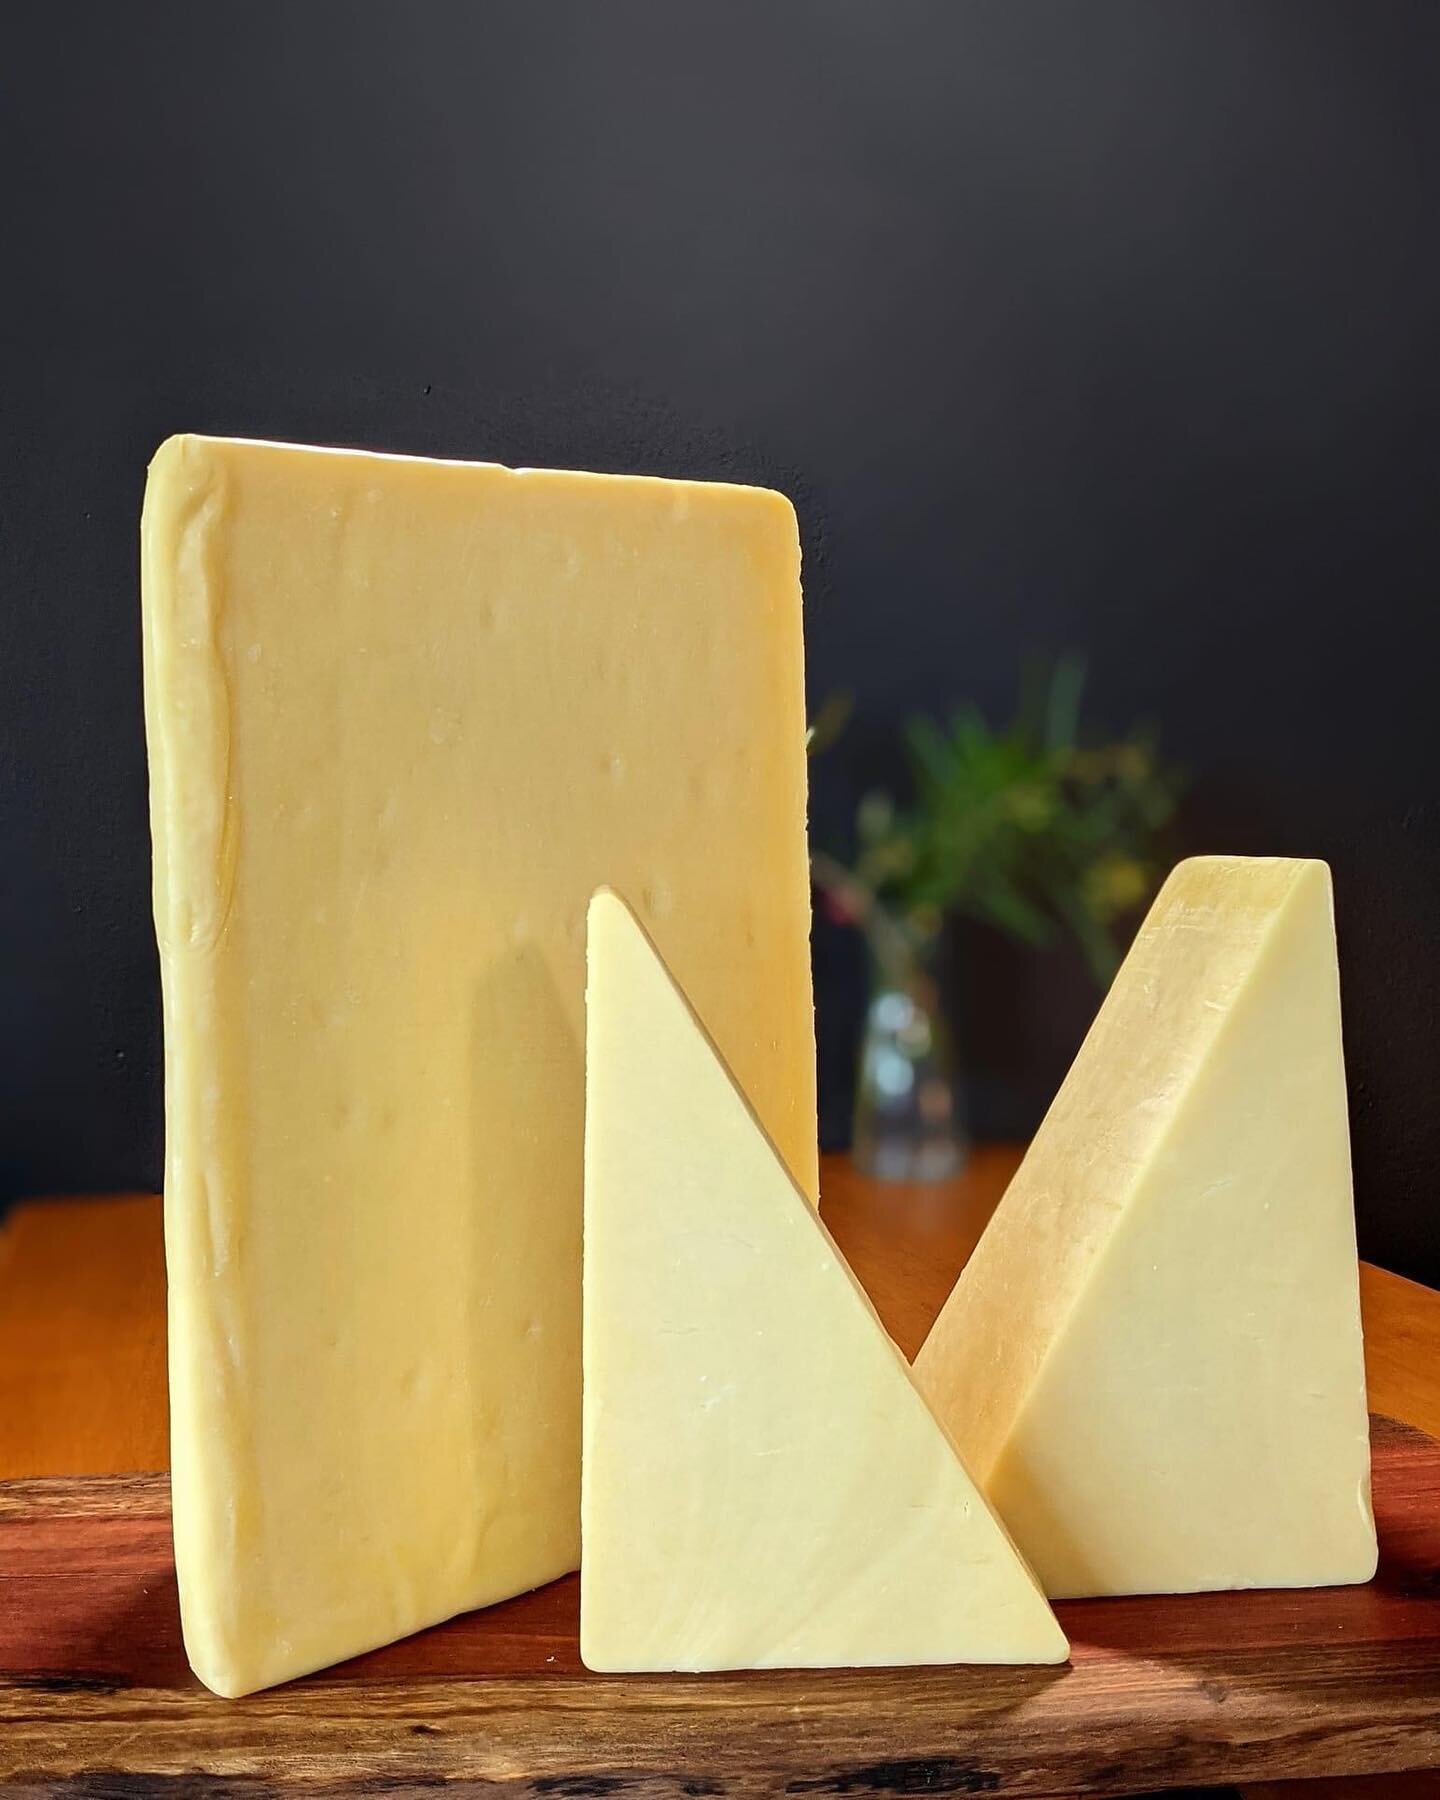 CHEESE OF THE WEEK: Somerset Aged Cheddar 🇬🇧
Using a 100 year-old recipe and after going through a traditional maturation period for no fewer than 15 months, this farmhouse-made cheddar is left with a rich flavour and sharp tang followed by a lasti